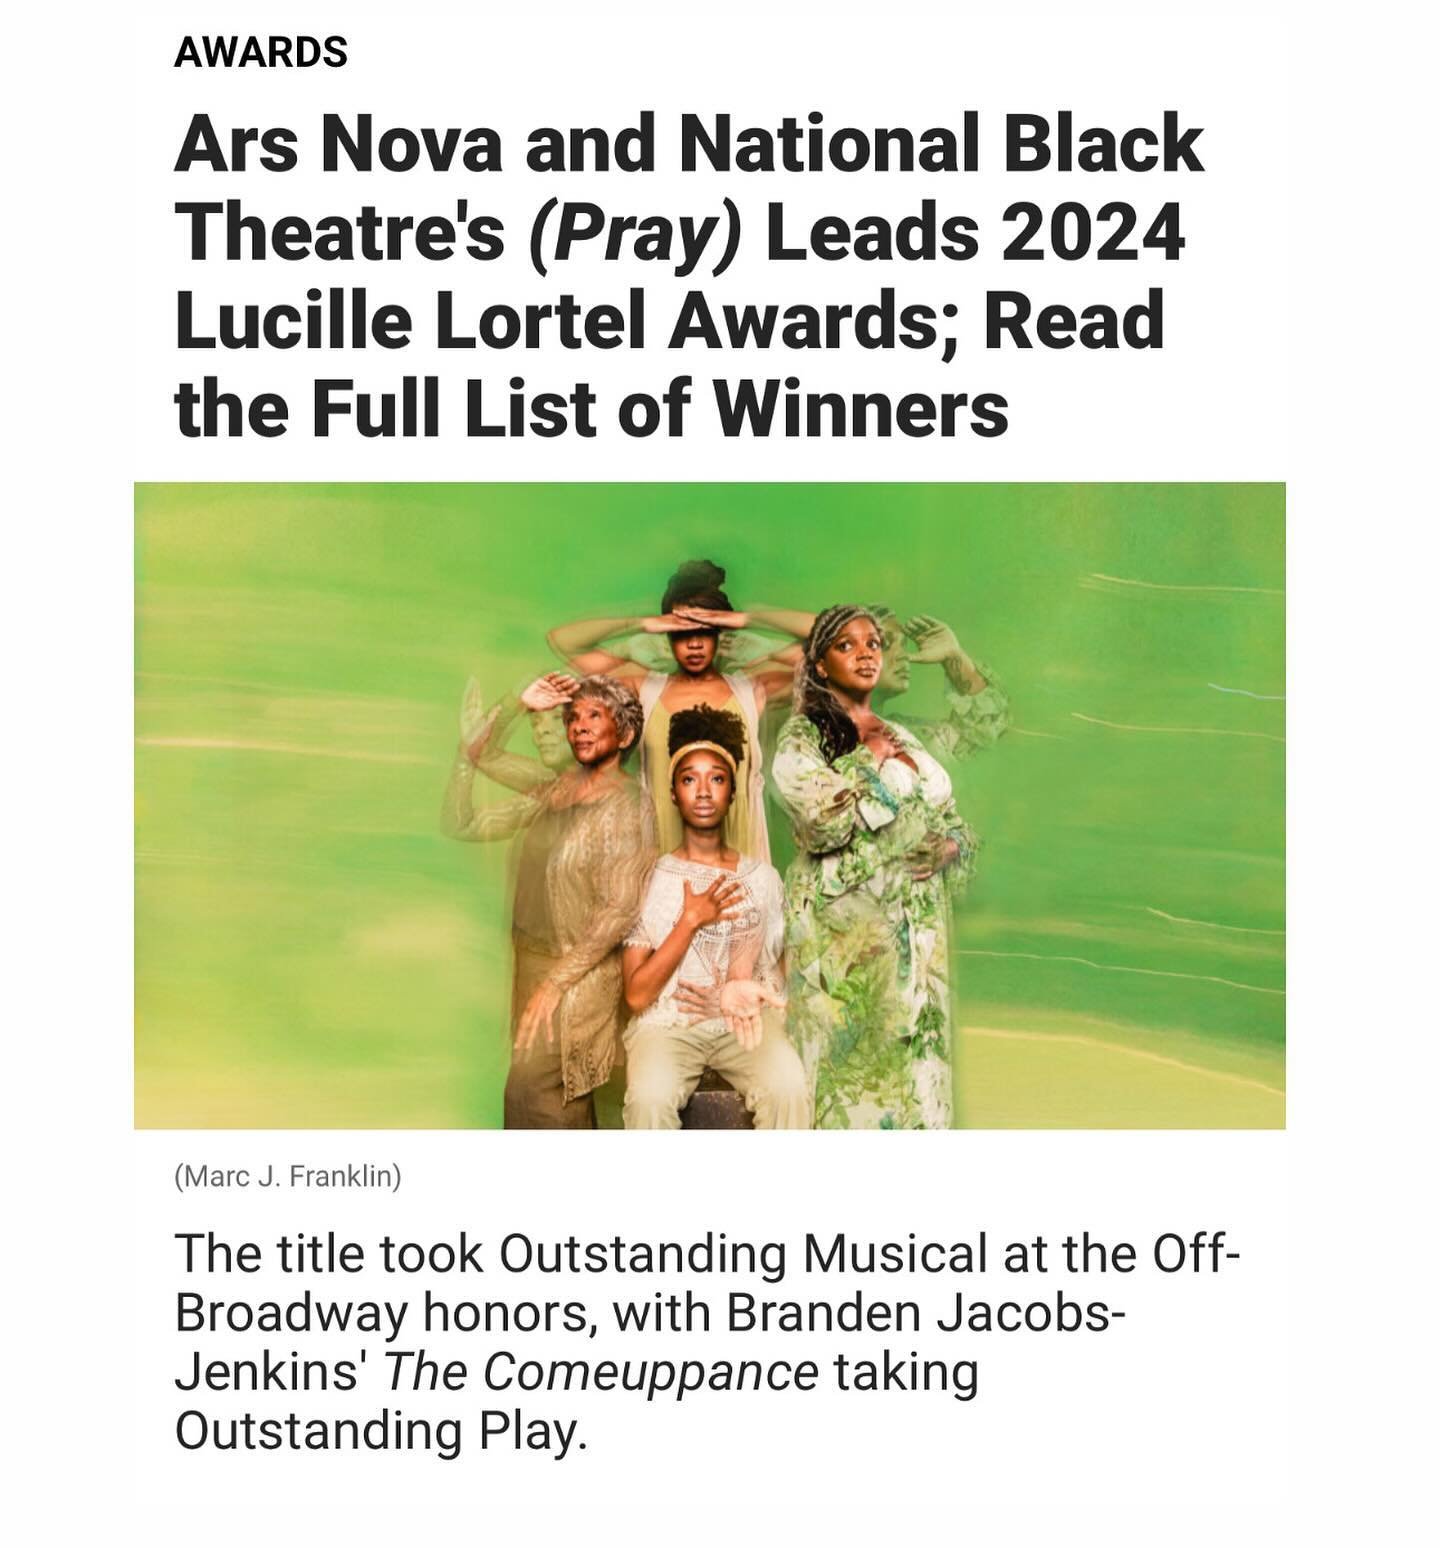 Congratulations to @__s__t__a__r__r___ for their two Lucille Lortel Award wins last night for (pray) - Outstanding Musical &amp; Outstanding Ensemble! ⭐️